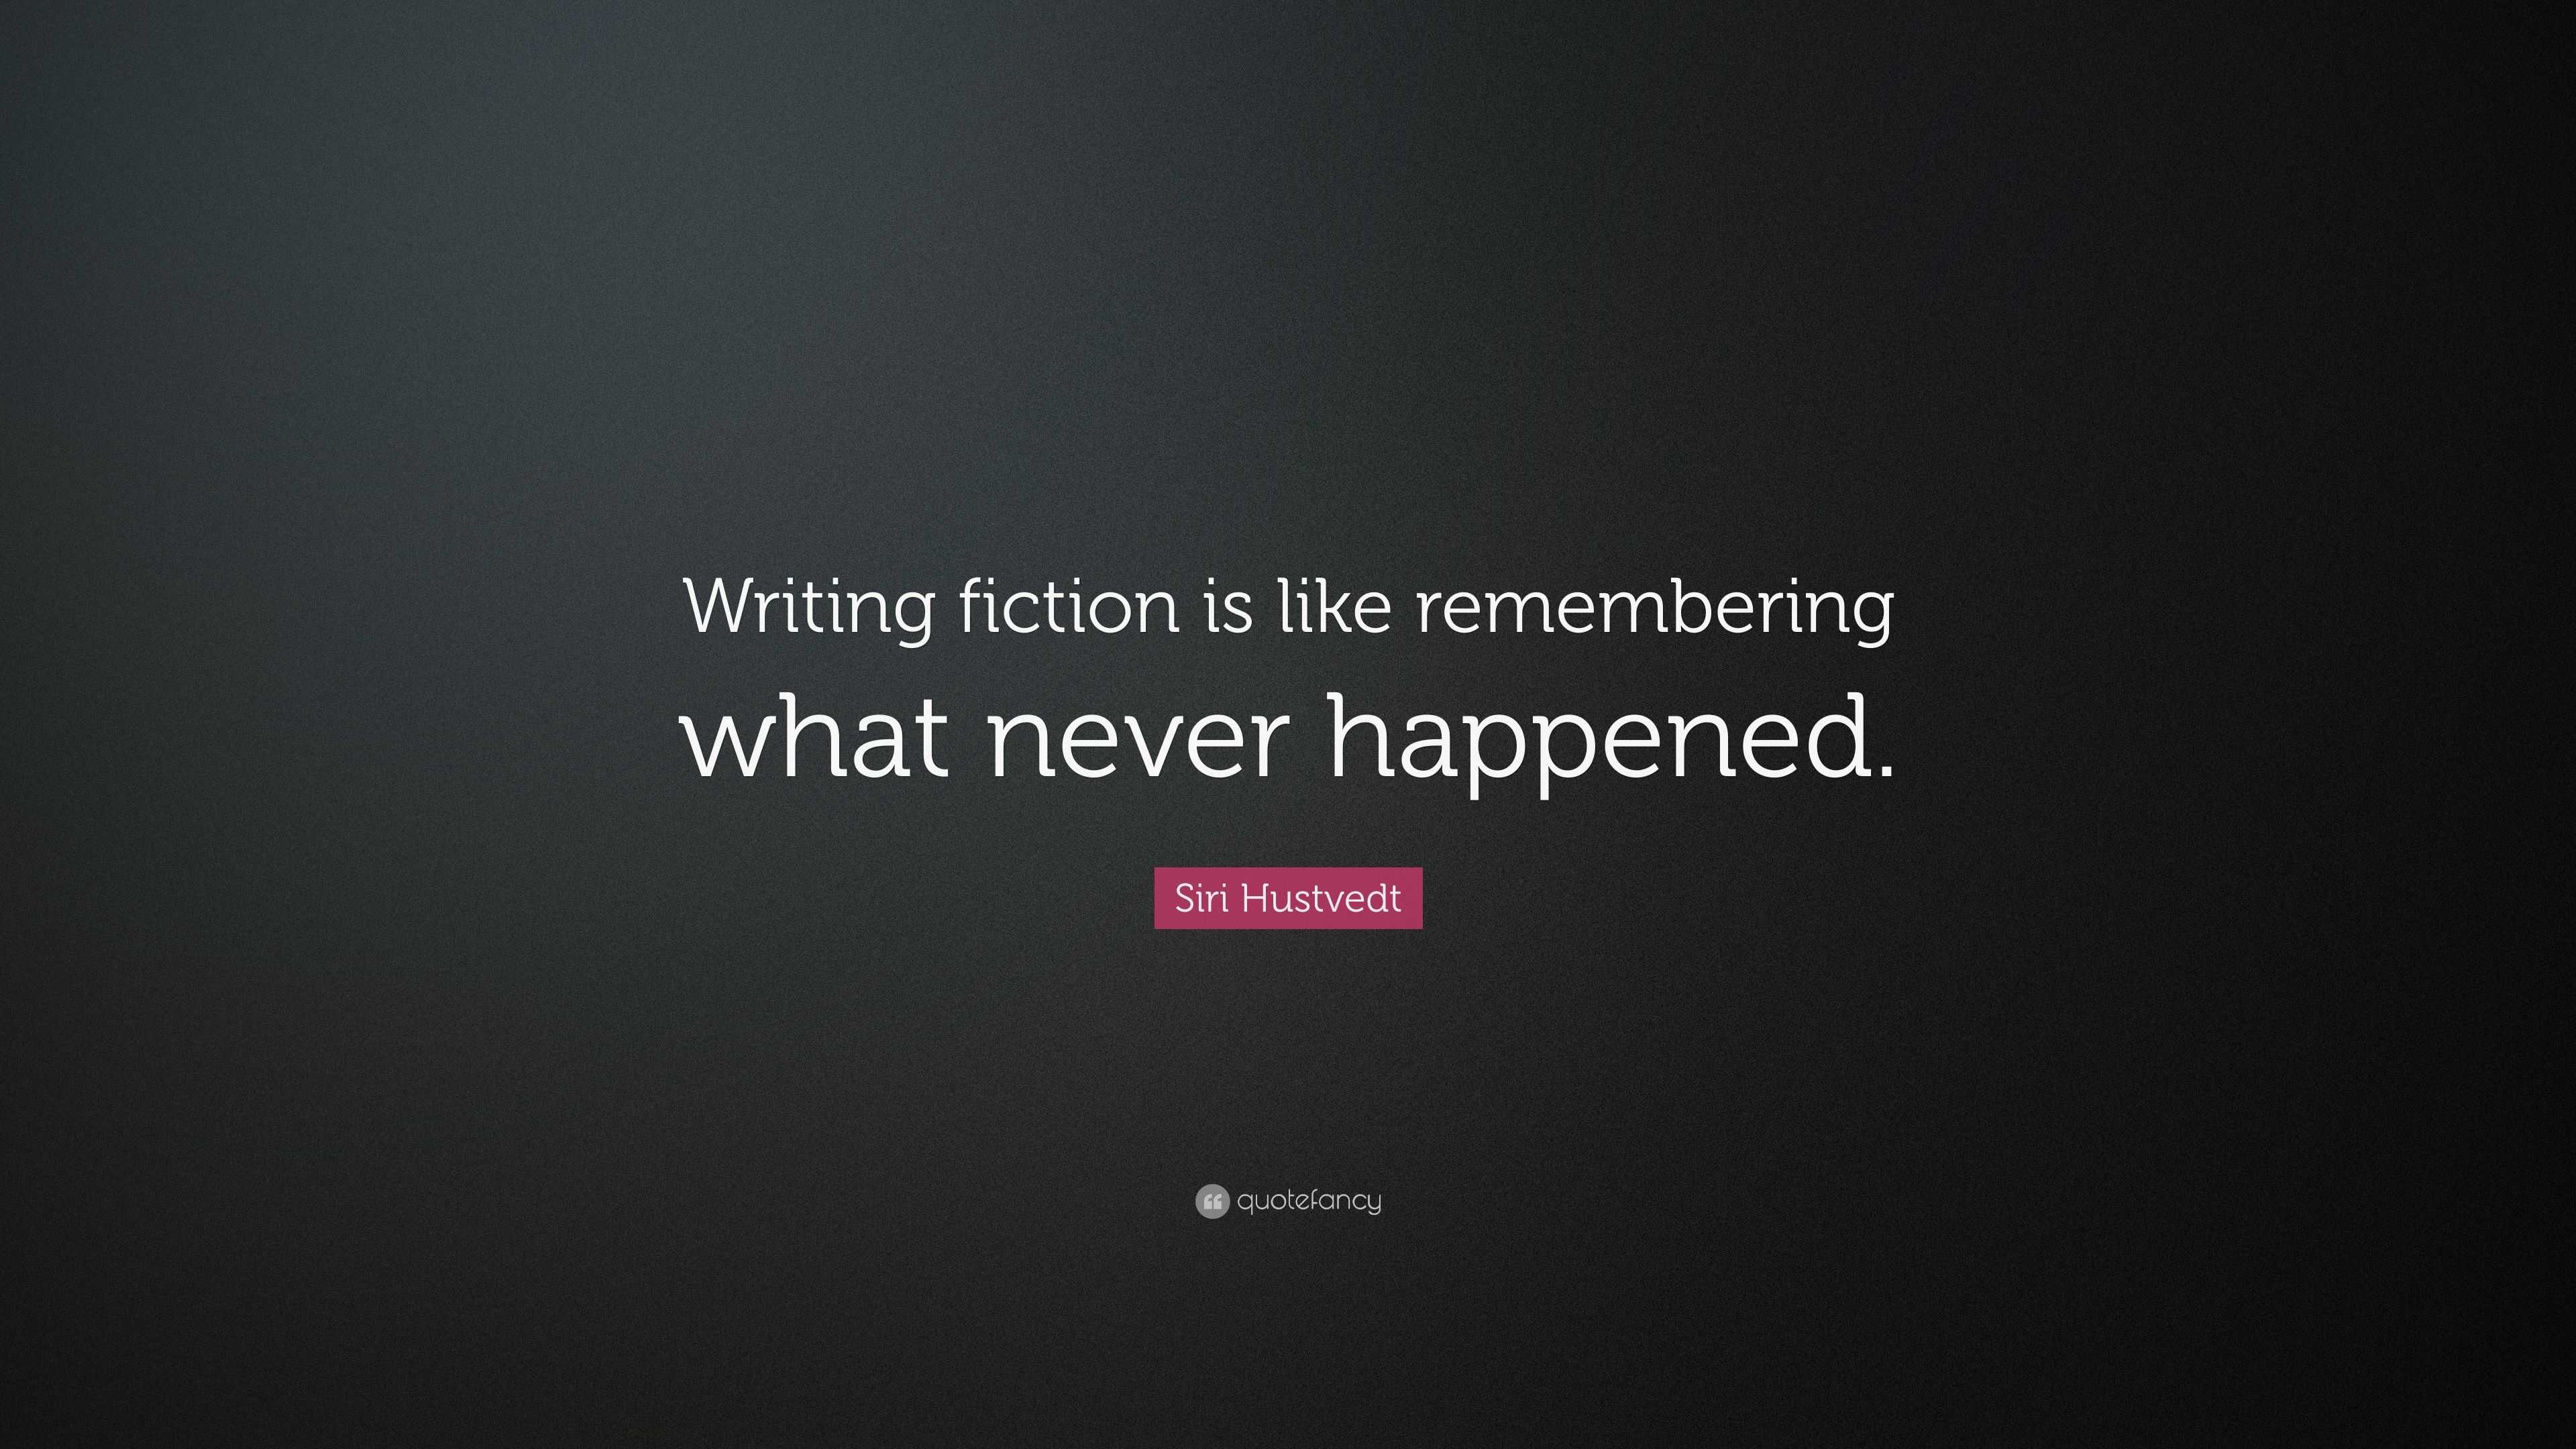 Siri Hustvedt Quote: “Writing fiction is like remembering what never ...